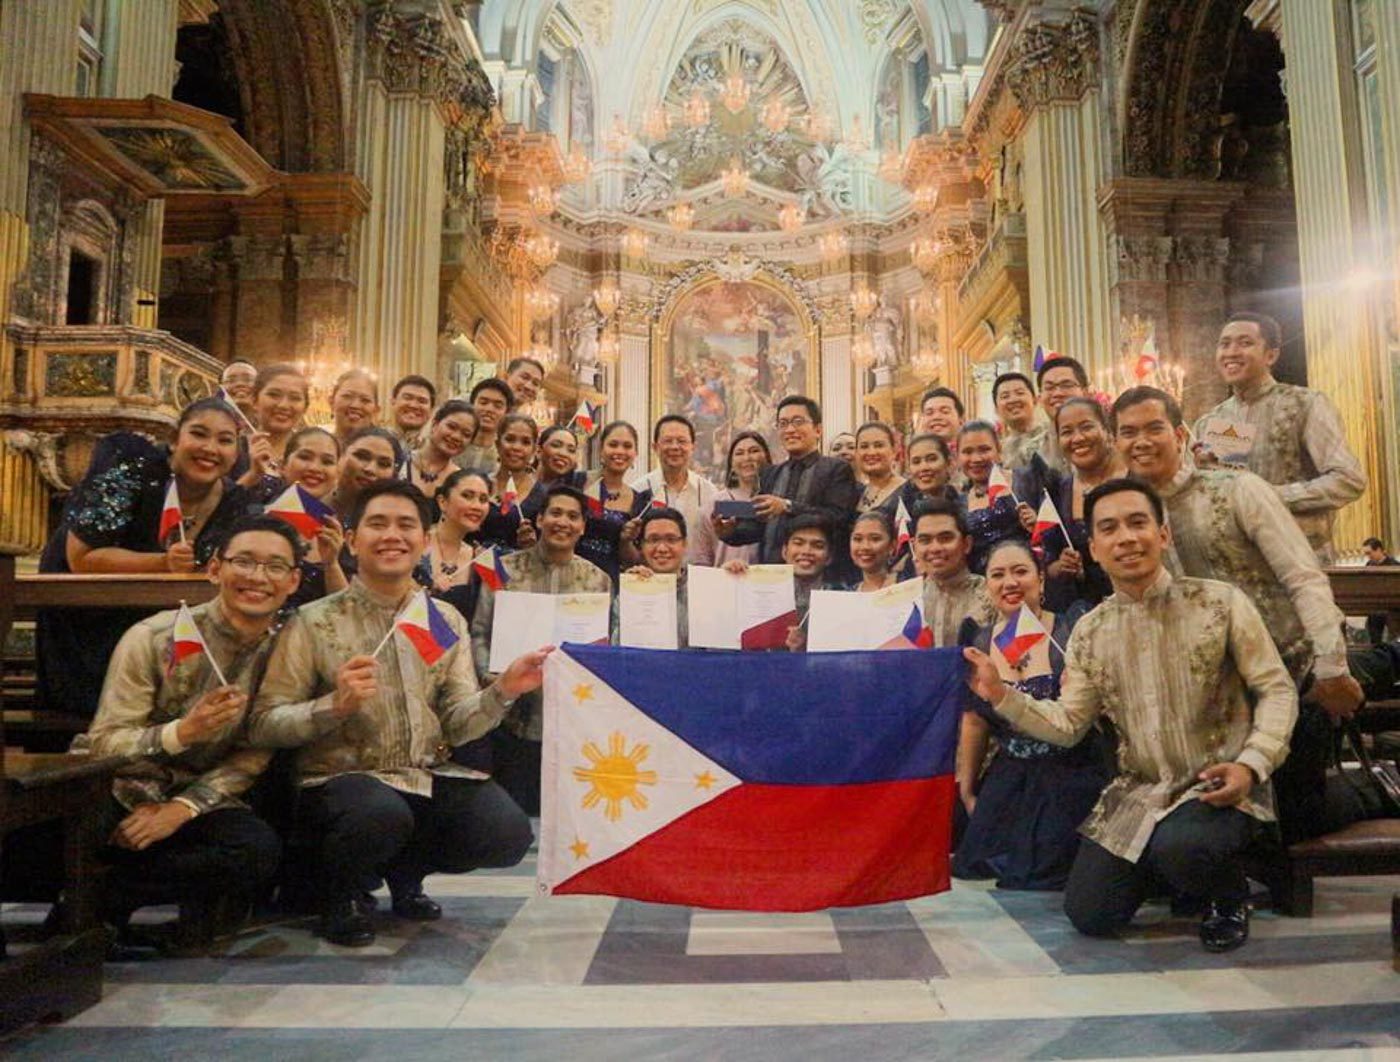 PH choirs dominate int’l competitions in Europe, Japan